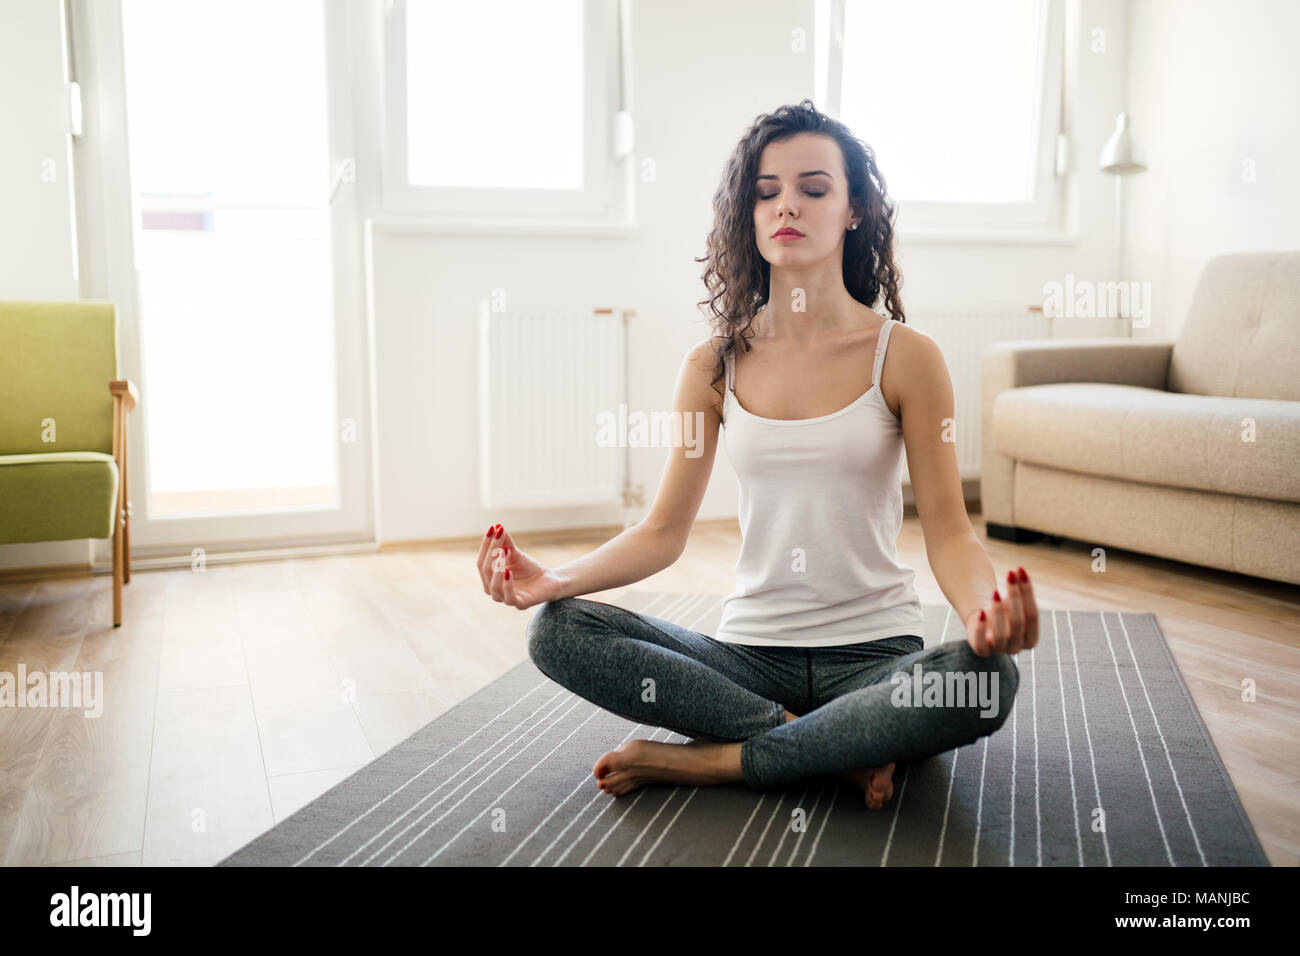 Young attractive woman relaxing and practicing yoga Stock Photo